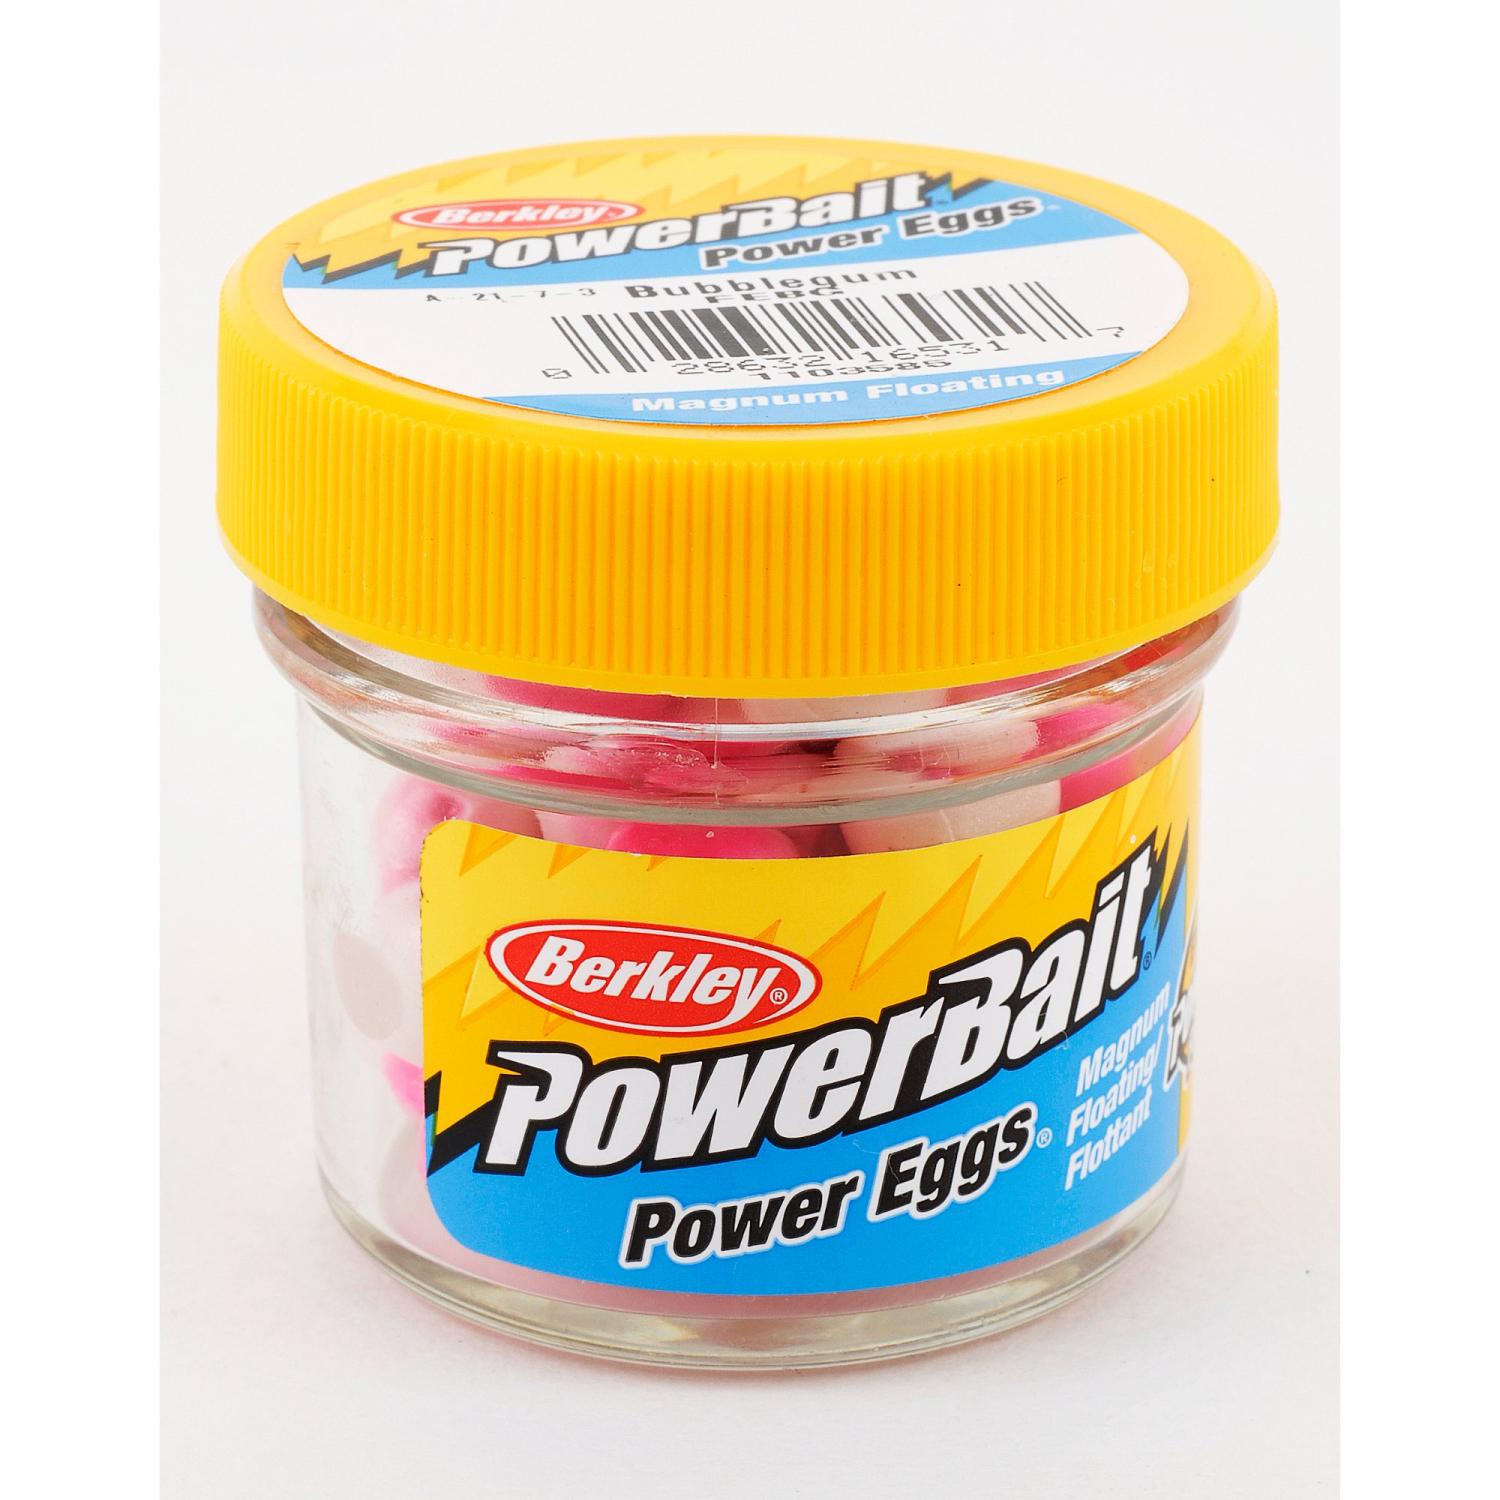  Berkley PowerBait Attractant, 2 oz : Fishing Baits And Scents  : Sports & Outdoors